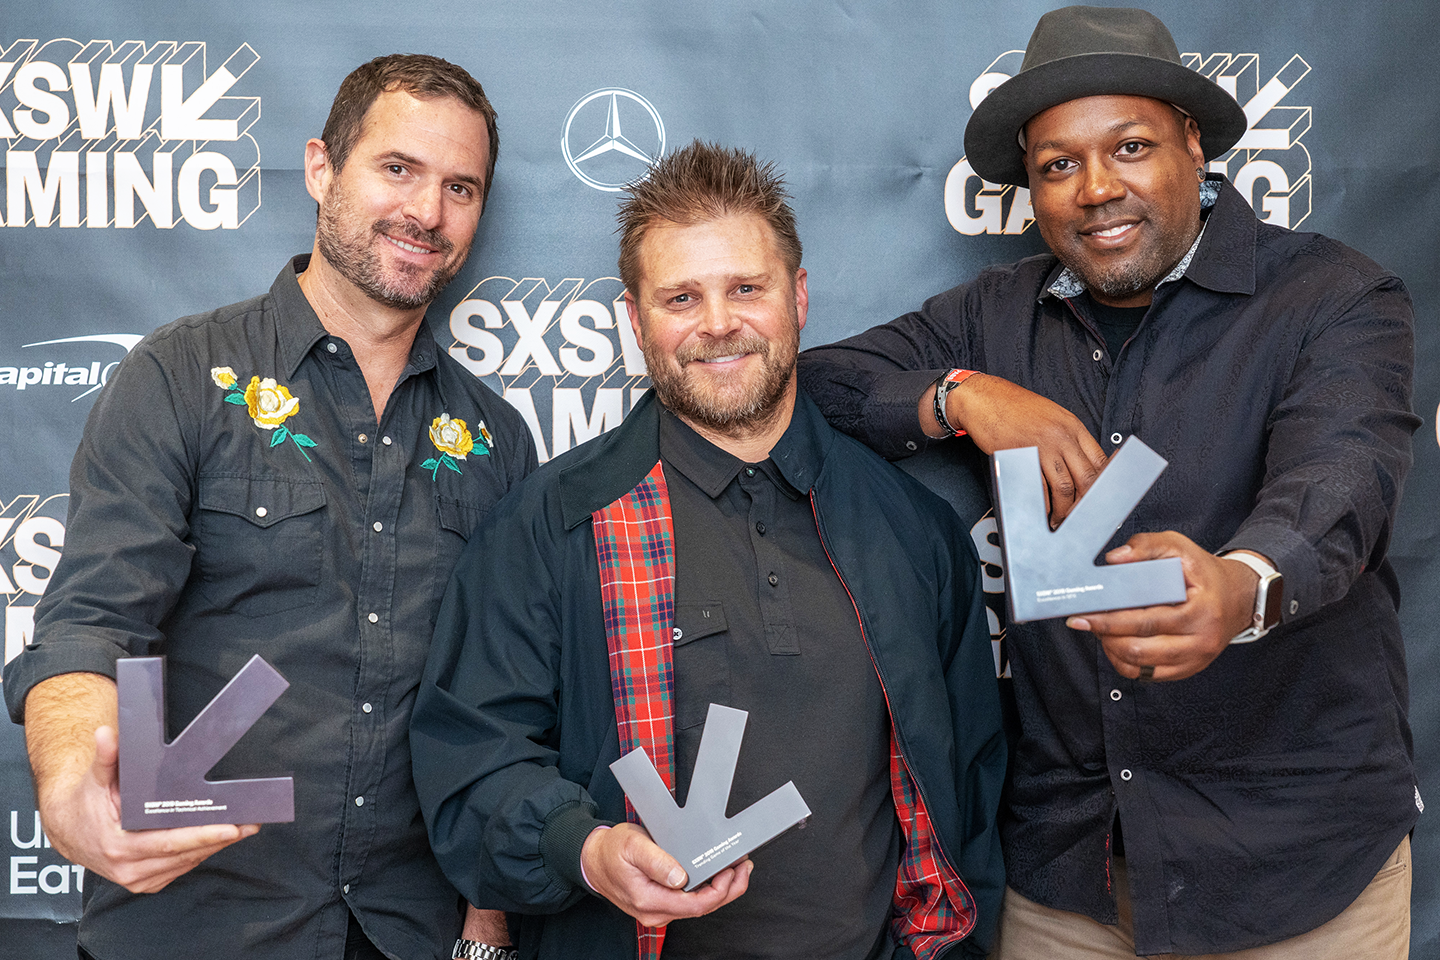 SXSW Gaming Awards and Gamer's Voice Applications Now Open